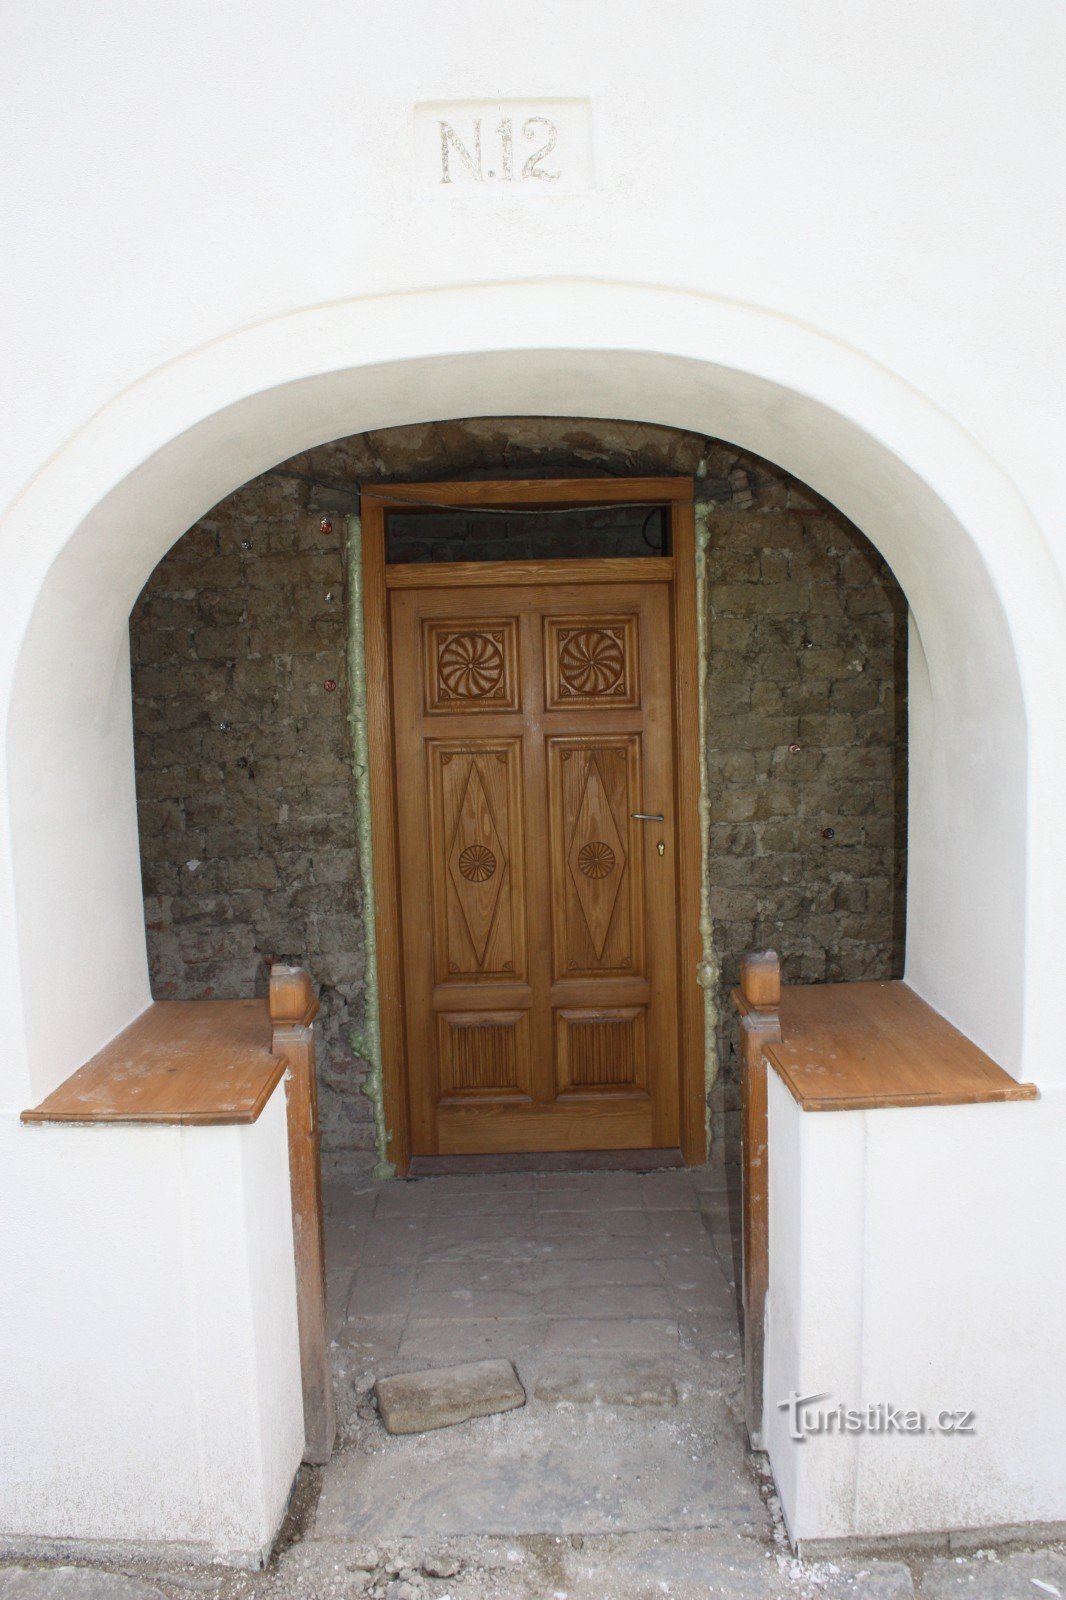 Renovated entrance to the barn